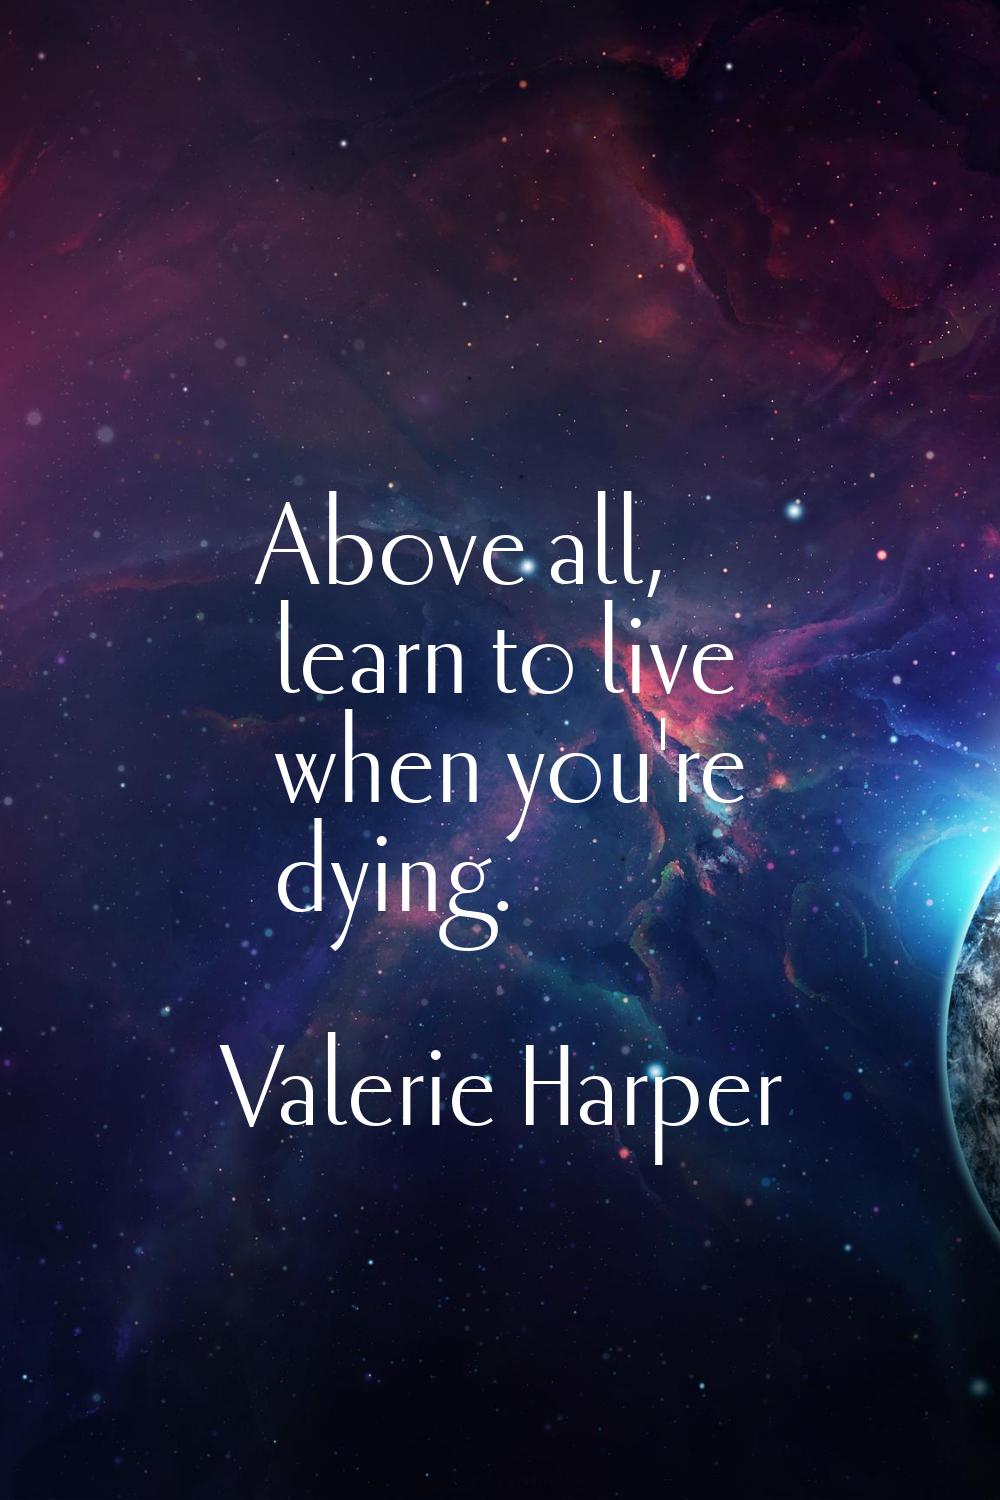 Above all, learn to live when you're dying.